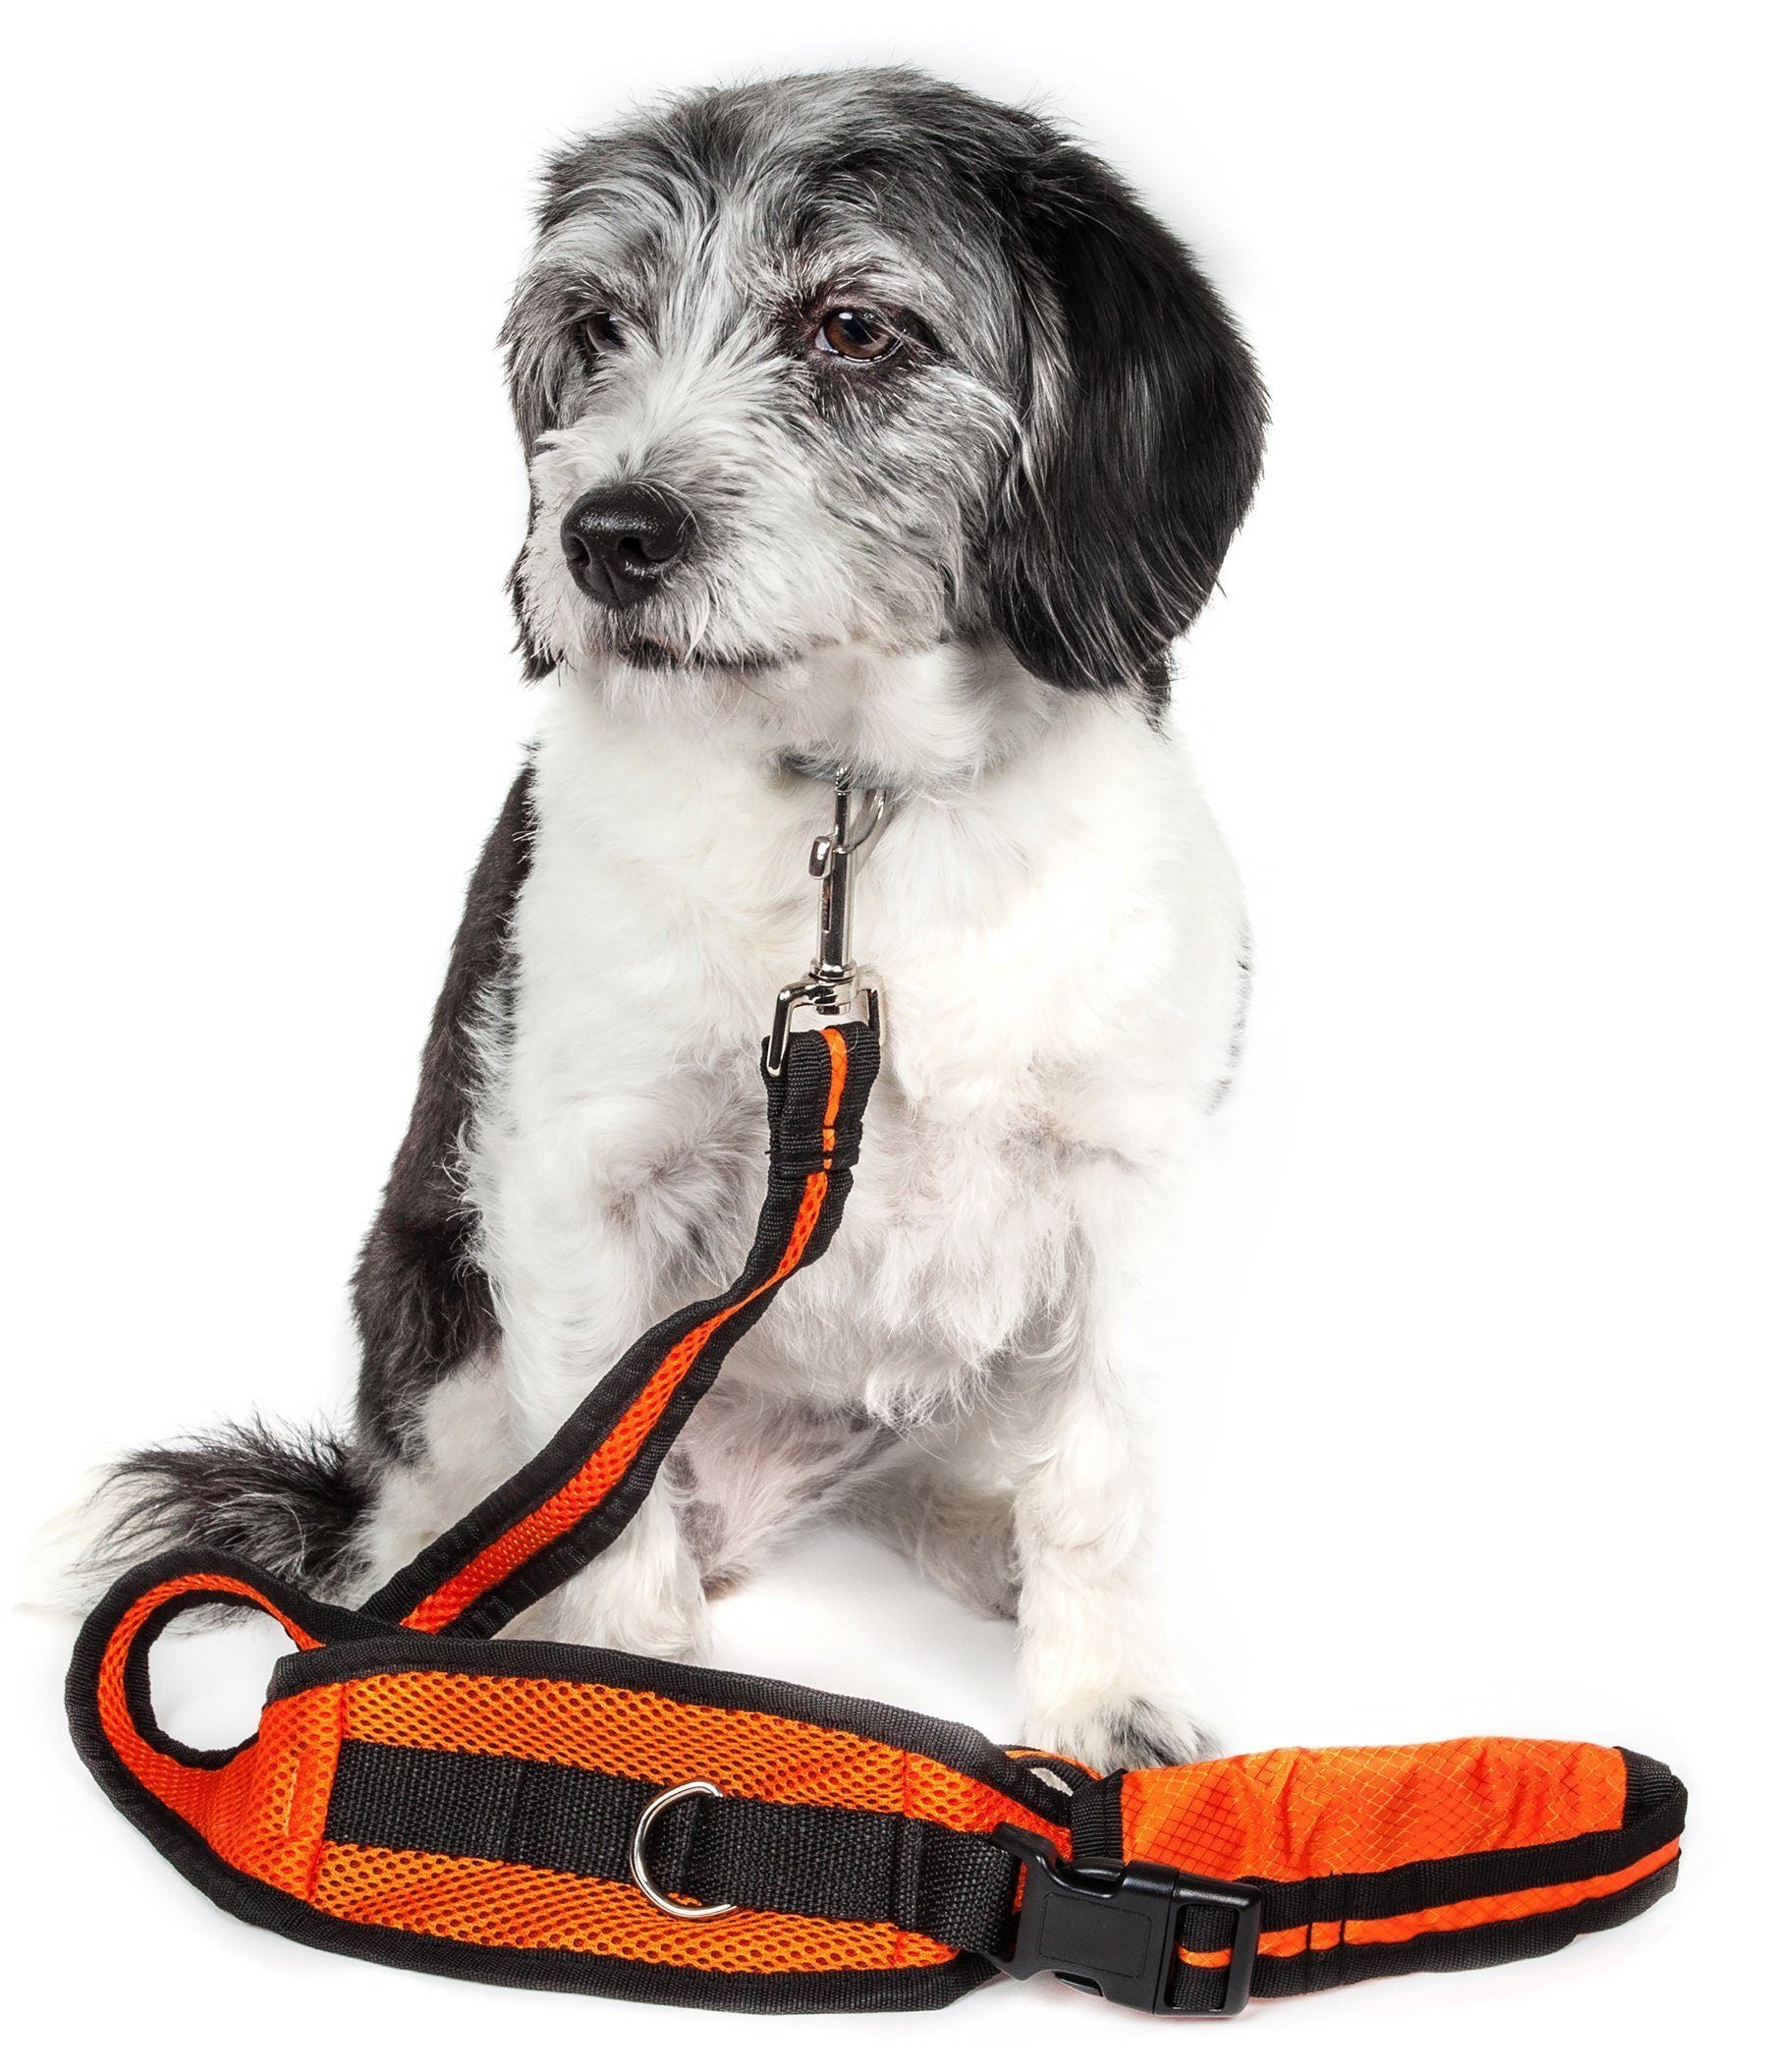 Pet Life ® 'Echelon' Hands Free and Convertible 2-In-1 Training Pet Dog Leash and Pet Belt Trainer Orange 